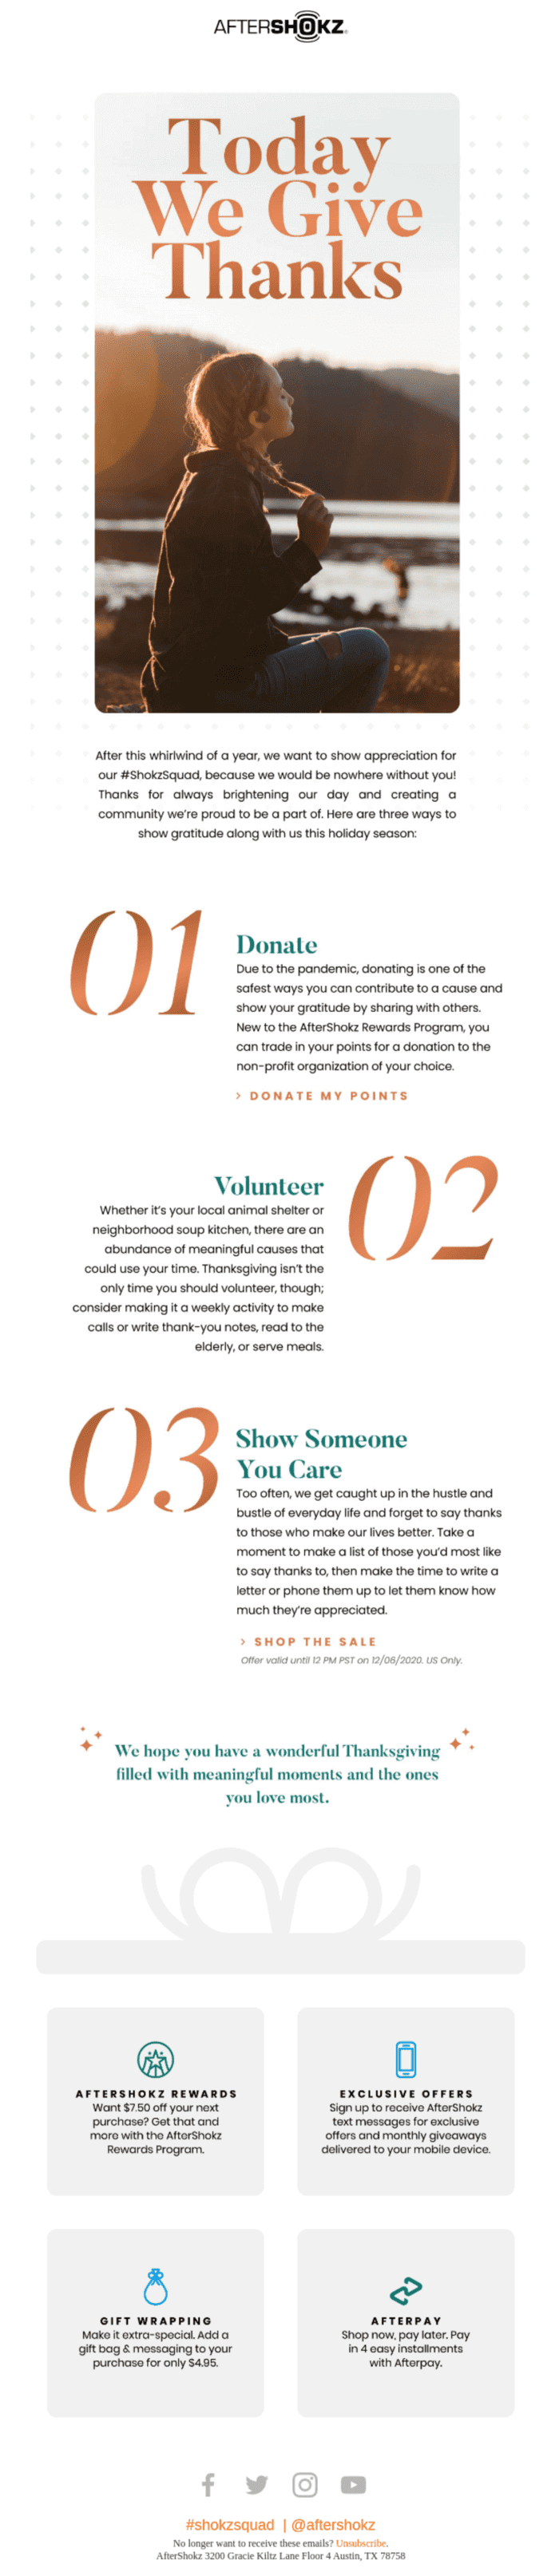 An email explaining 3 ways to give thanks: donating, volunteering, and showing someone you care